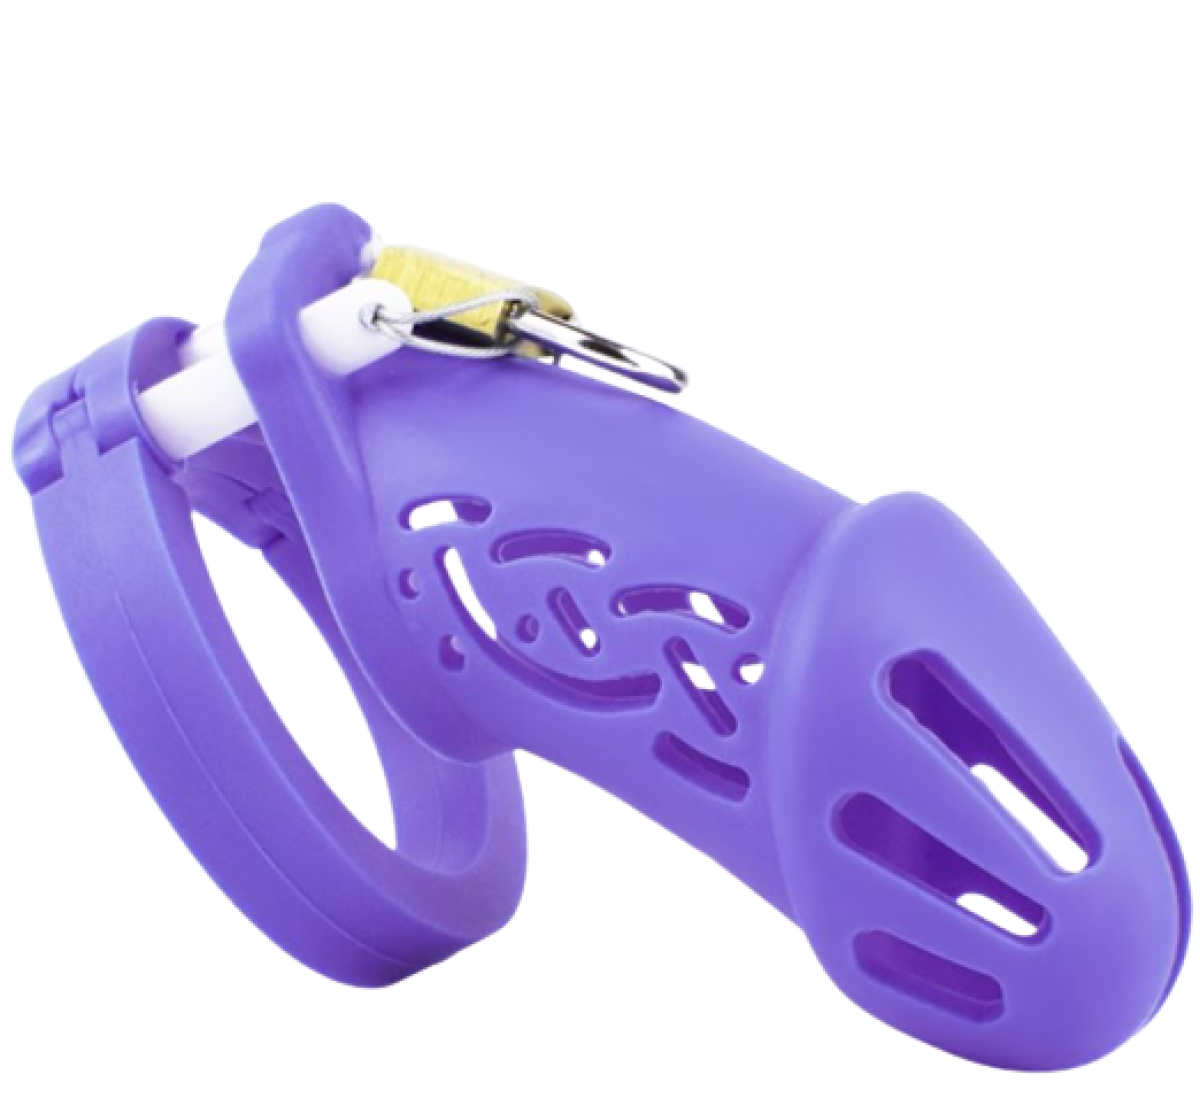 https://www.cagechastete.fr/wp-content/uploads/2023/03/cage-chastete-silicone-violette-1200x1098.png